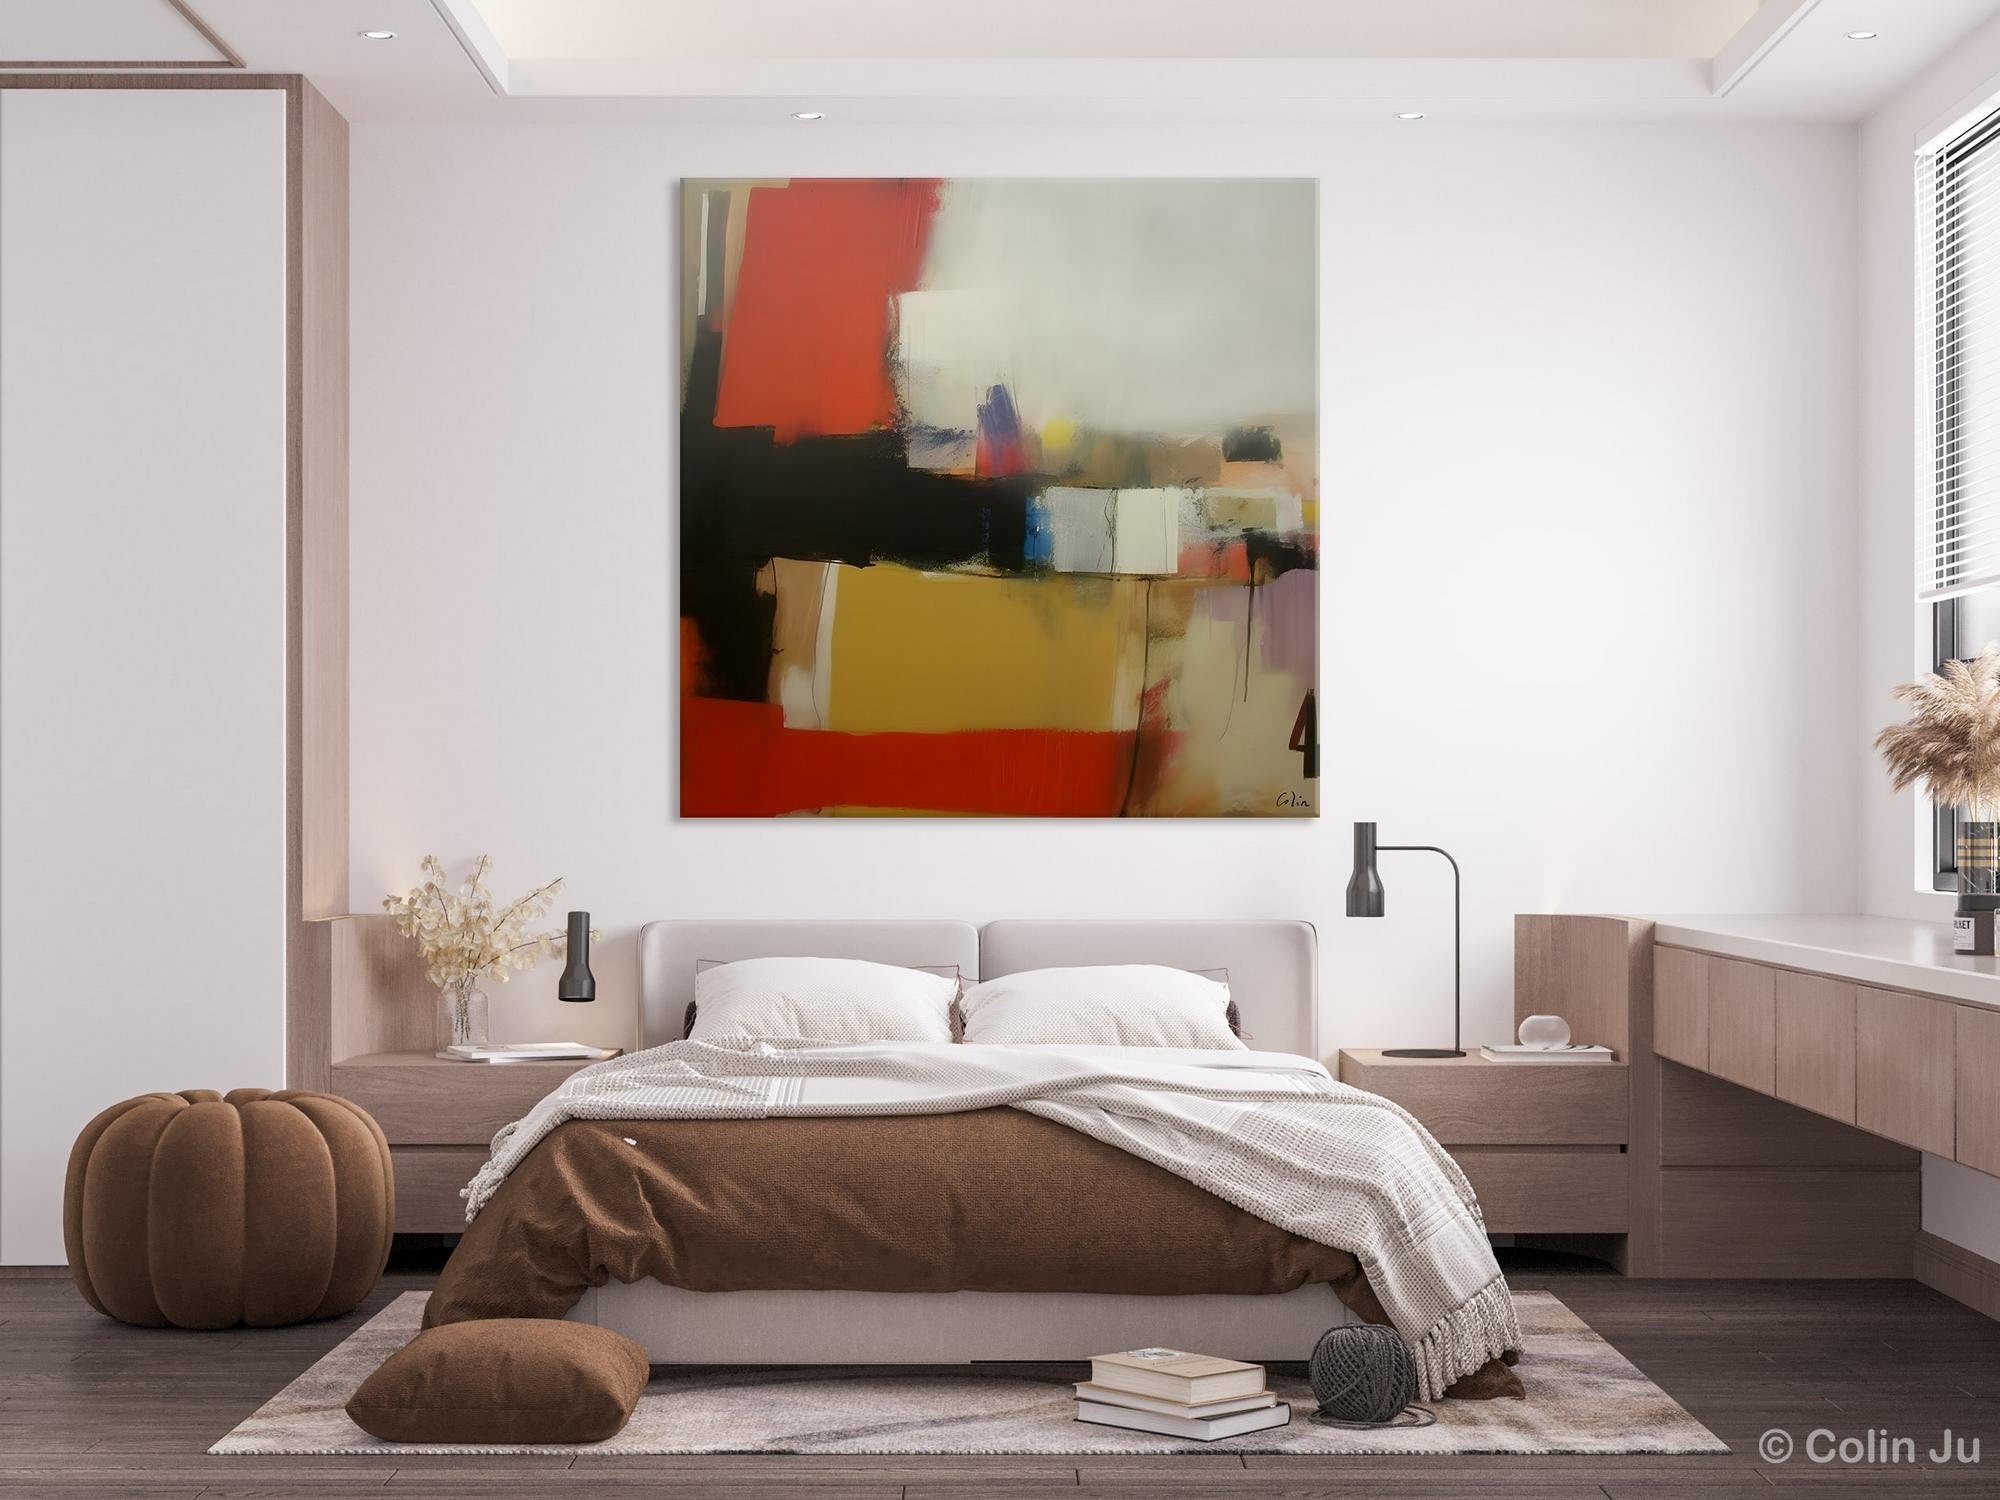 Modern Original Abstract Art, Canvas Paintings for Sale, Large Wall Art for Bedroom, Geometric Modern Acrylic Art, Contemporary Canvas Art-Art Painting Canvas